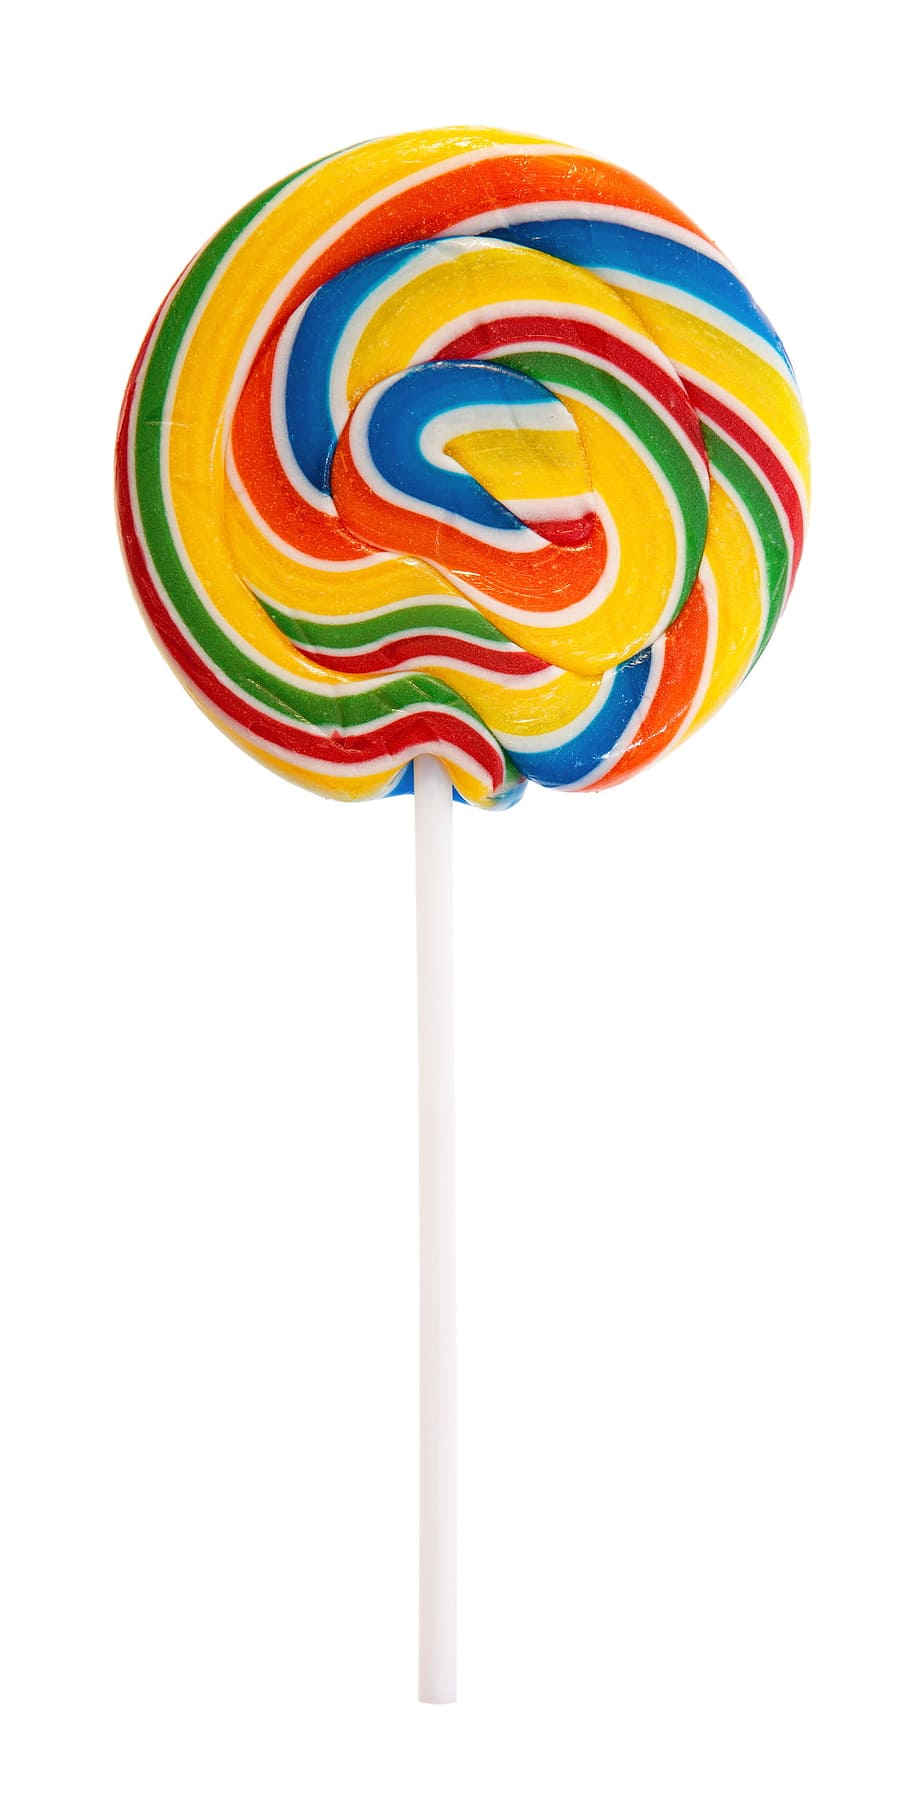 lollipop, bright, candy, circle, confection, confectionery, dessert, food, fun, isolated